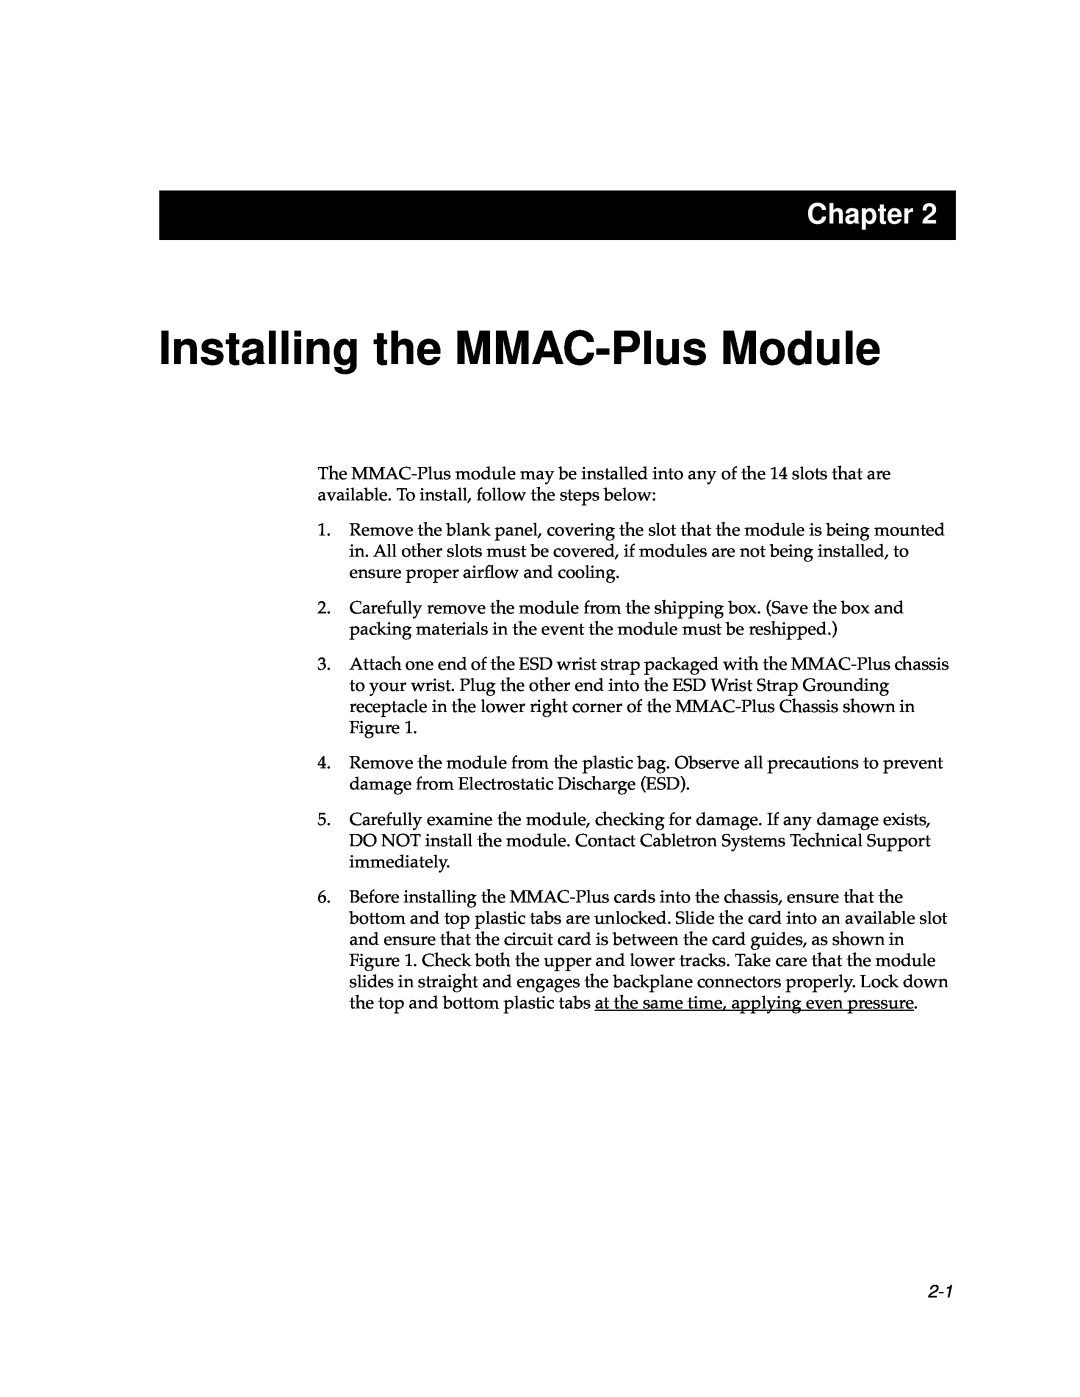 Cabletron Systems 9F106-01 manual Installing the MMAC-PlusModule, Chapter 